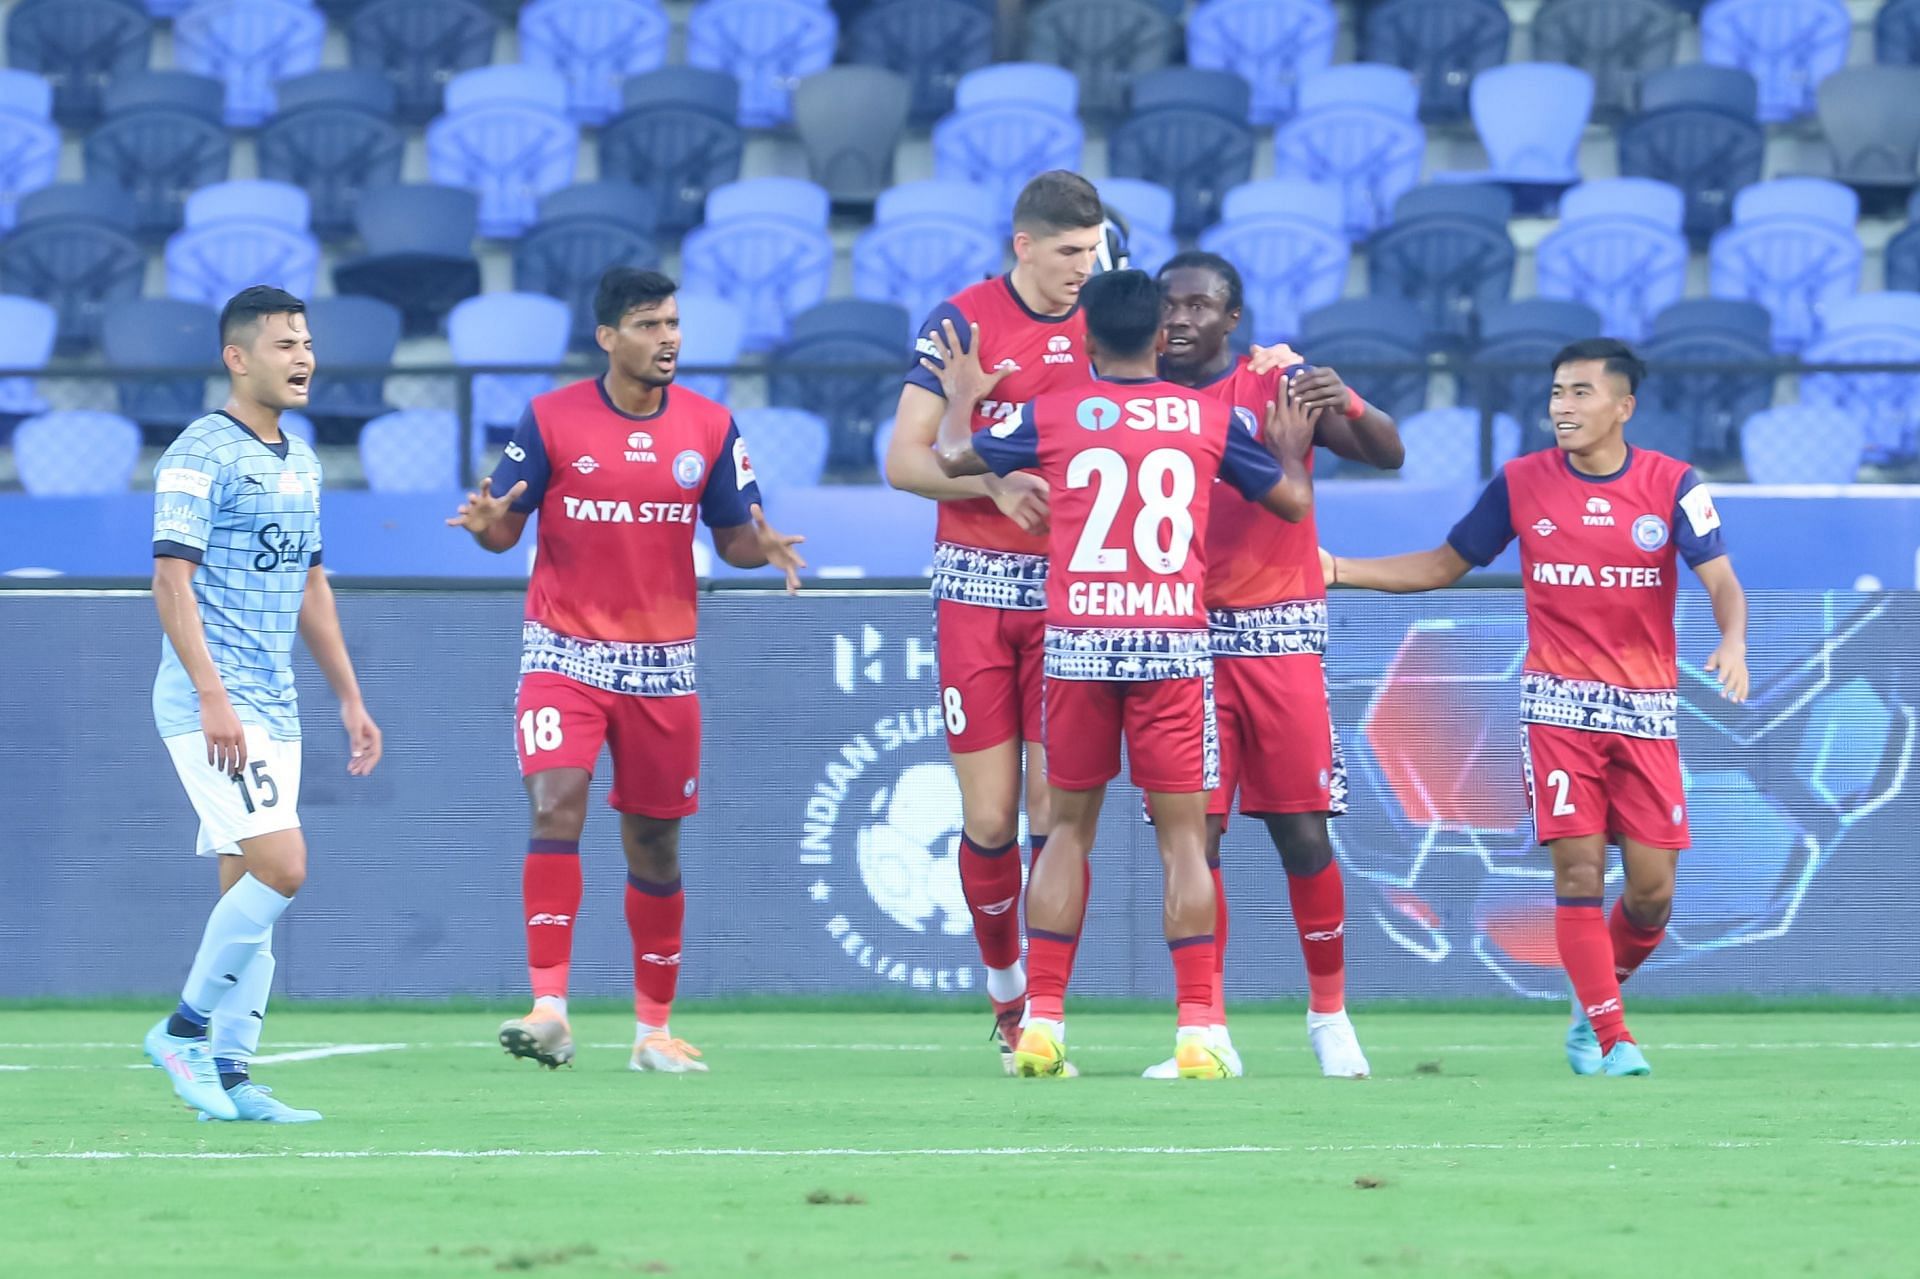 Jamshedpur FC came away with a draw against Mumbai City FC.